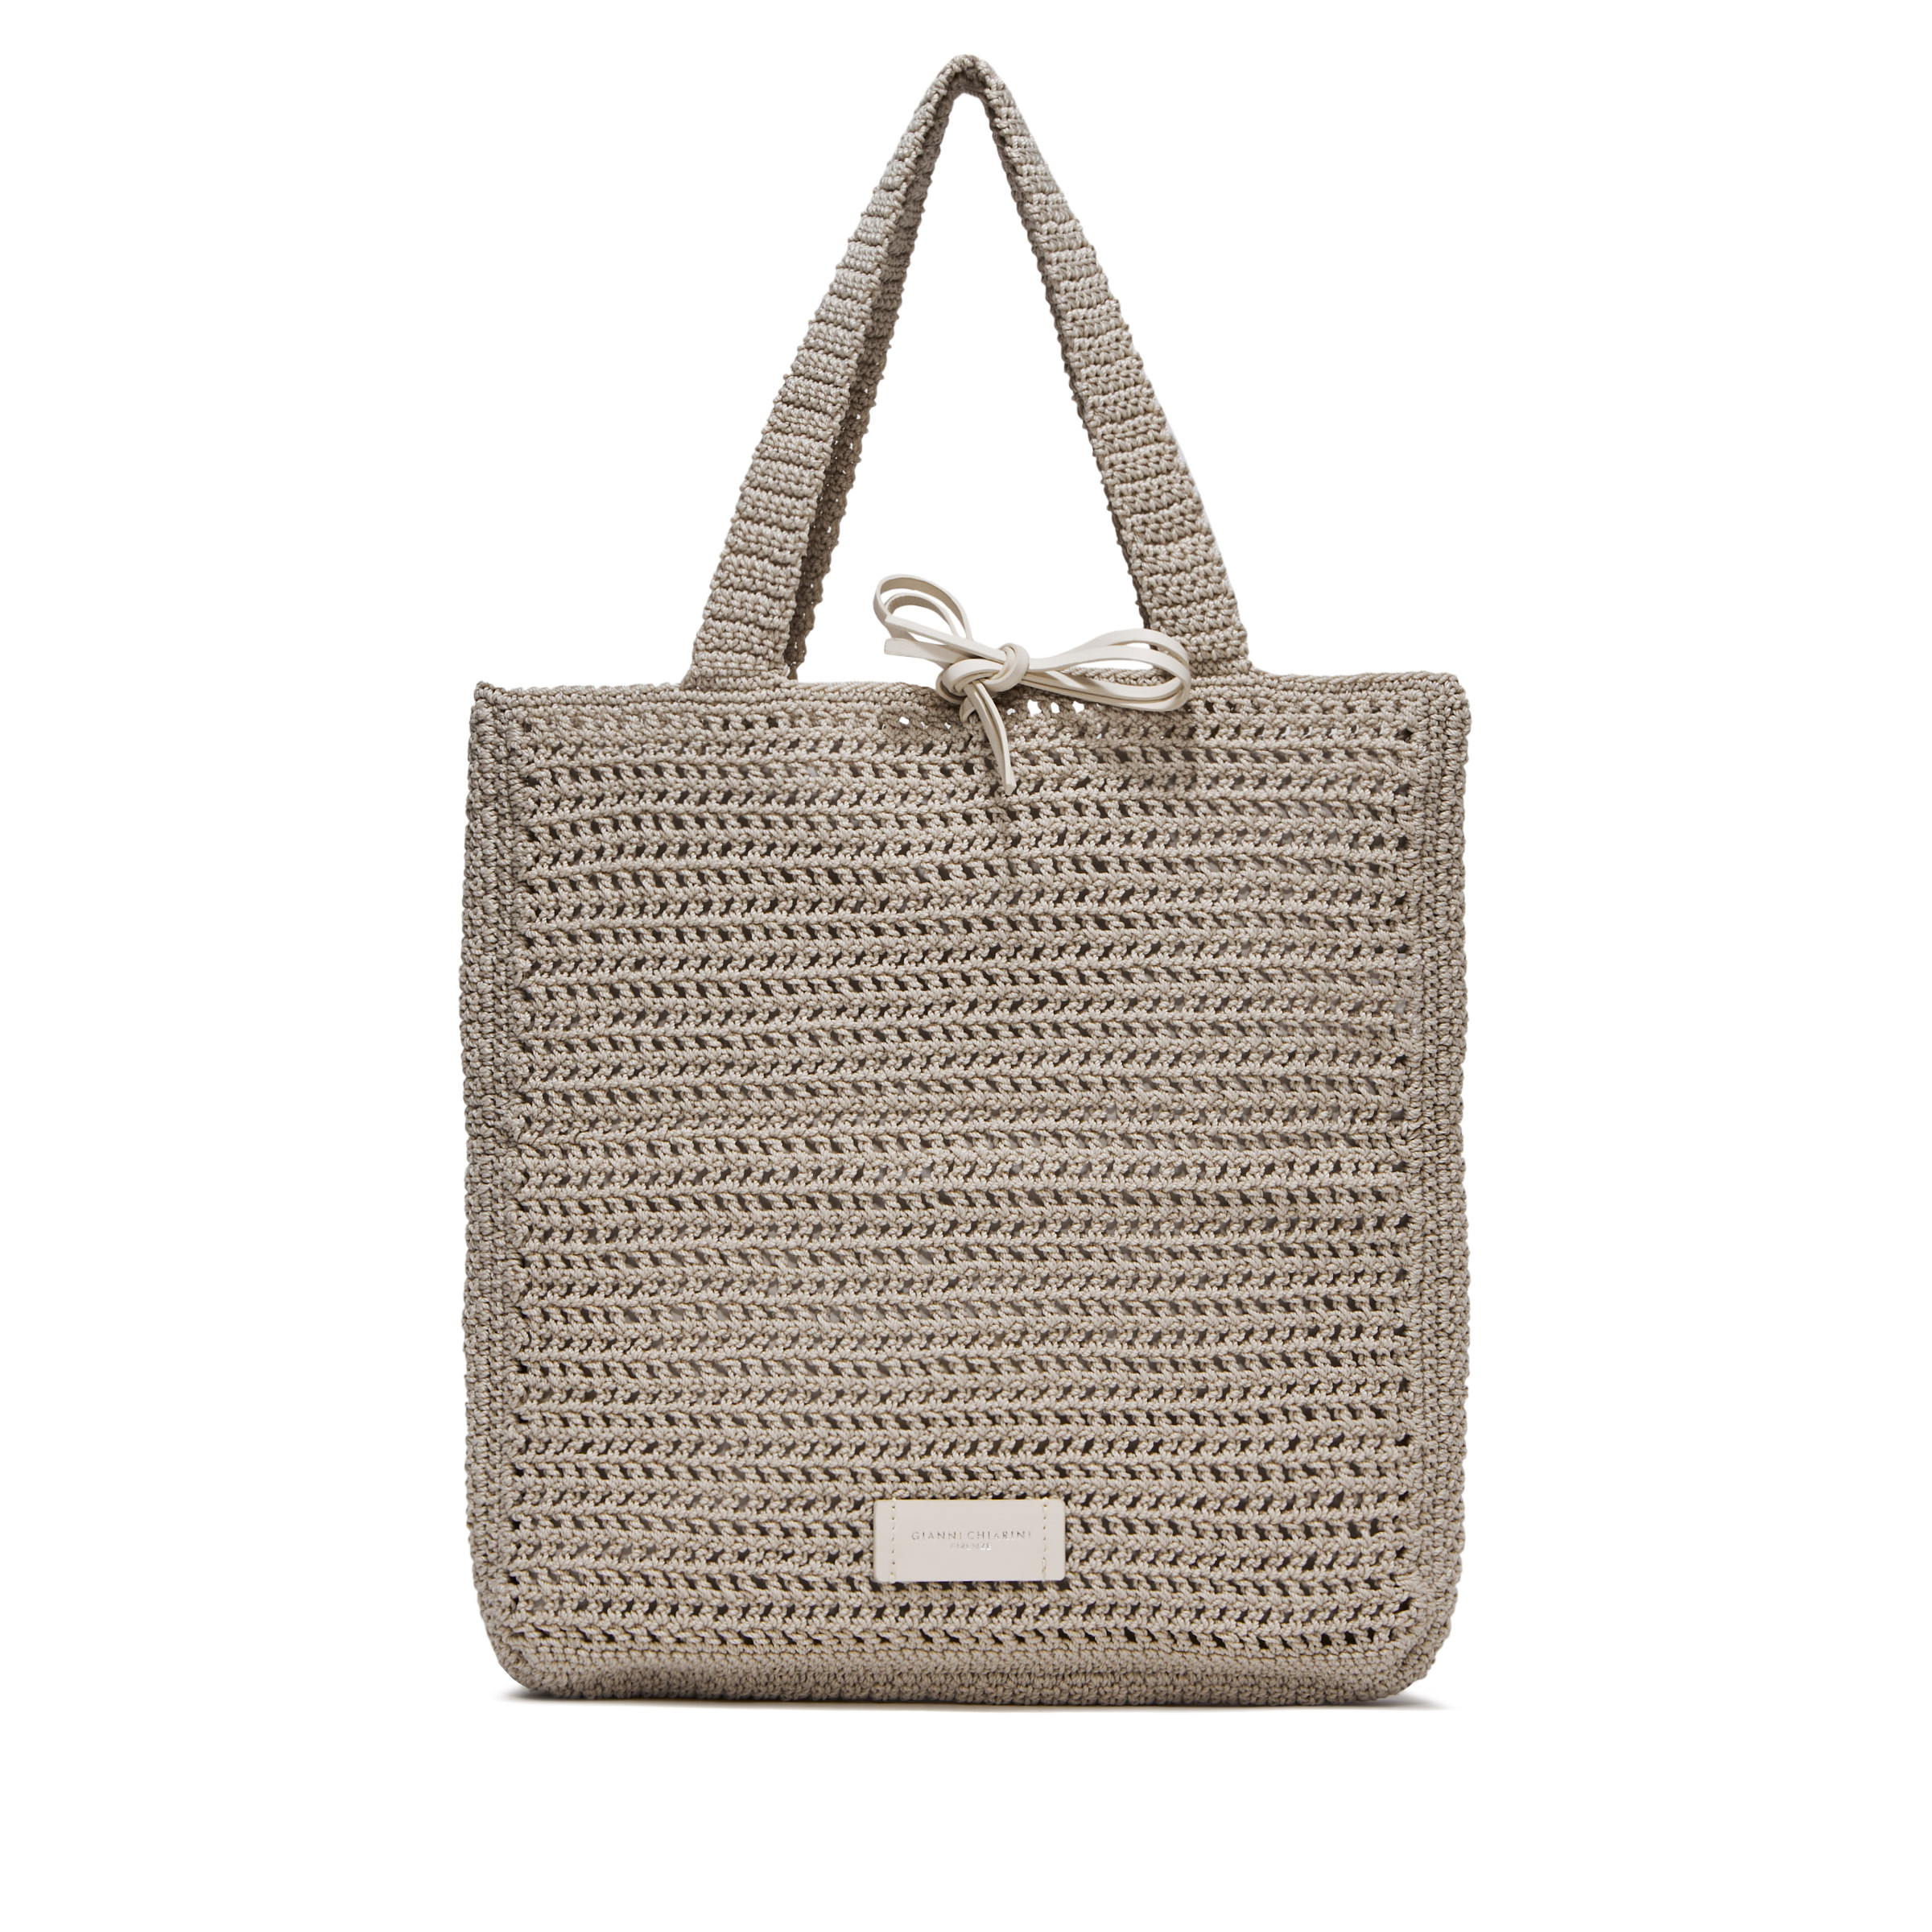 Gianni Chiarini - Victoria bag in leather and fabric, Pearl Grey, large image number 0